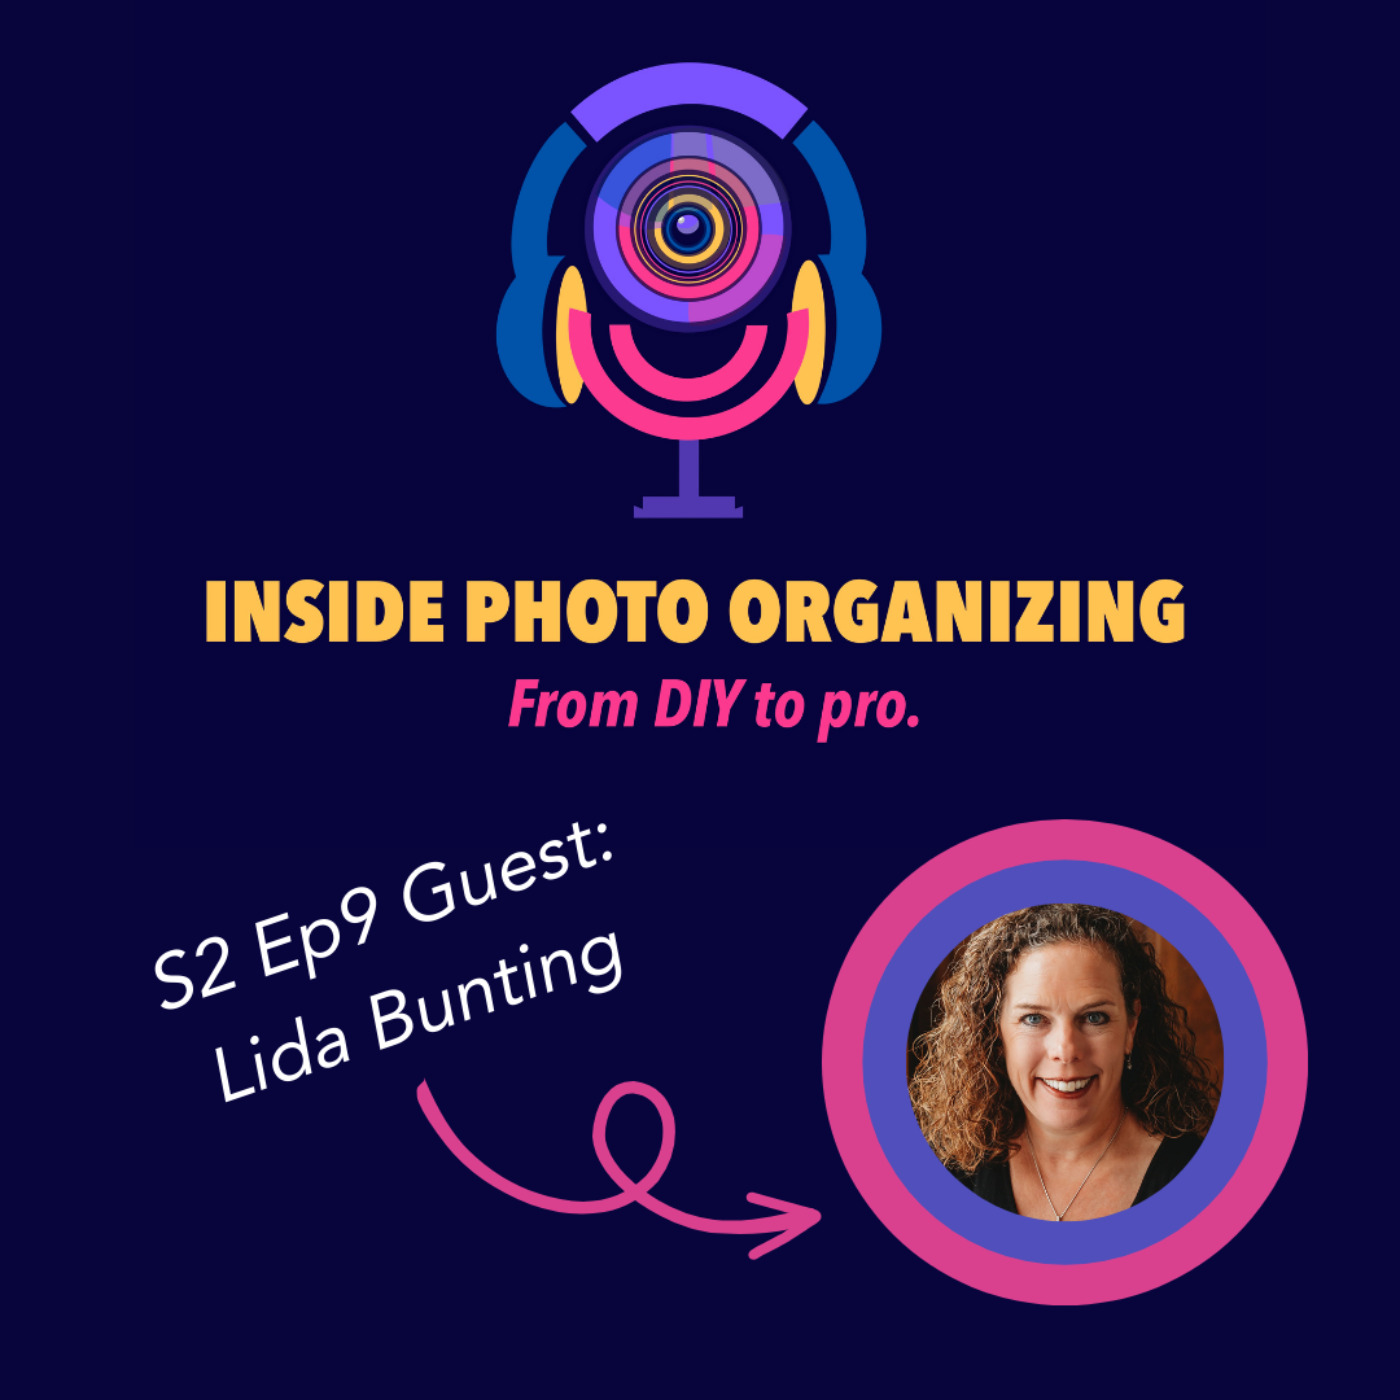 Episode 9: Lida Bunting - All About Photo Books